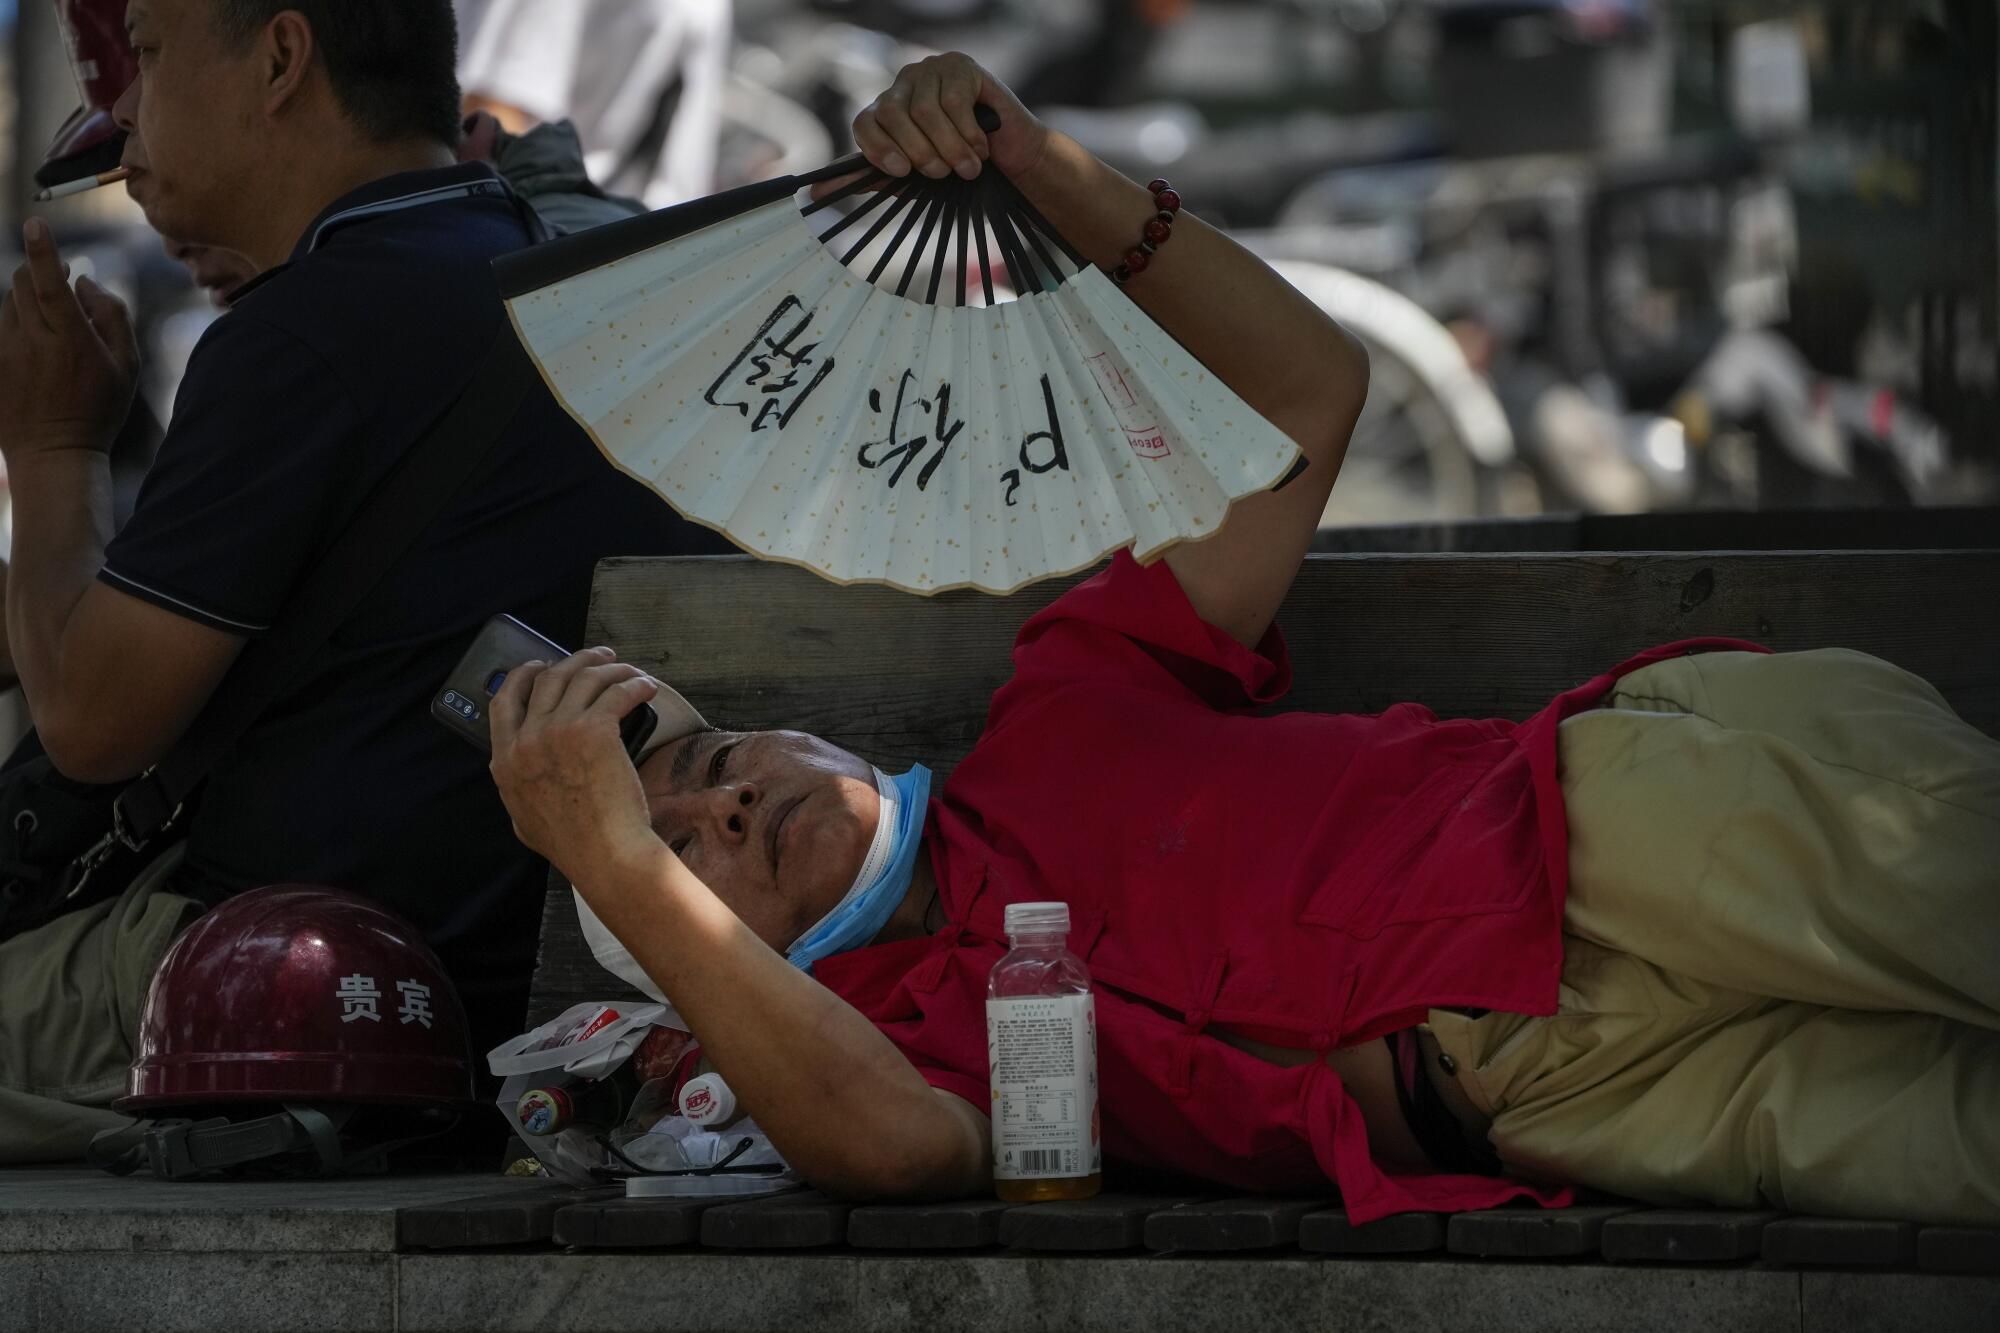 A man cools himself with a fan while browsing his phone 